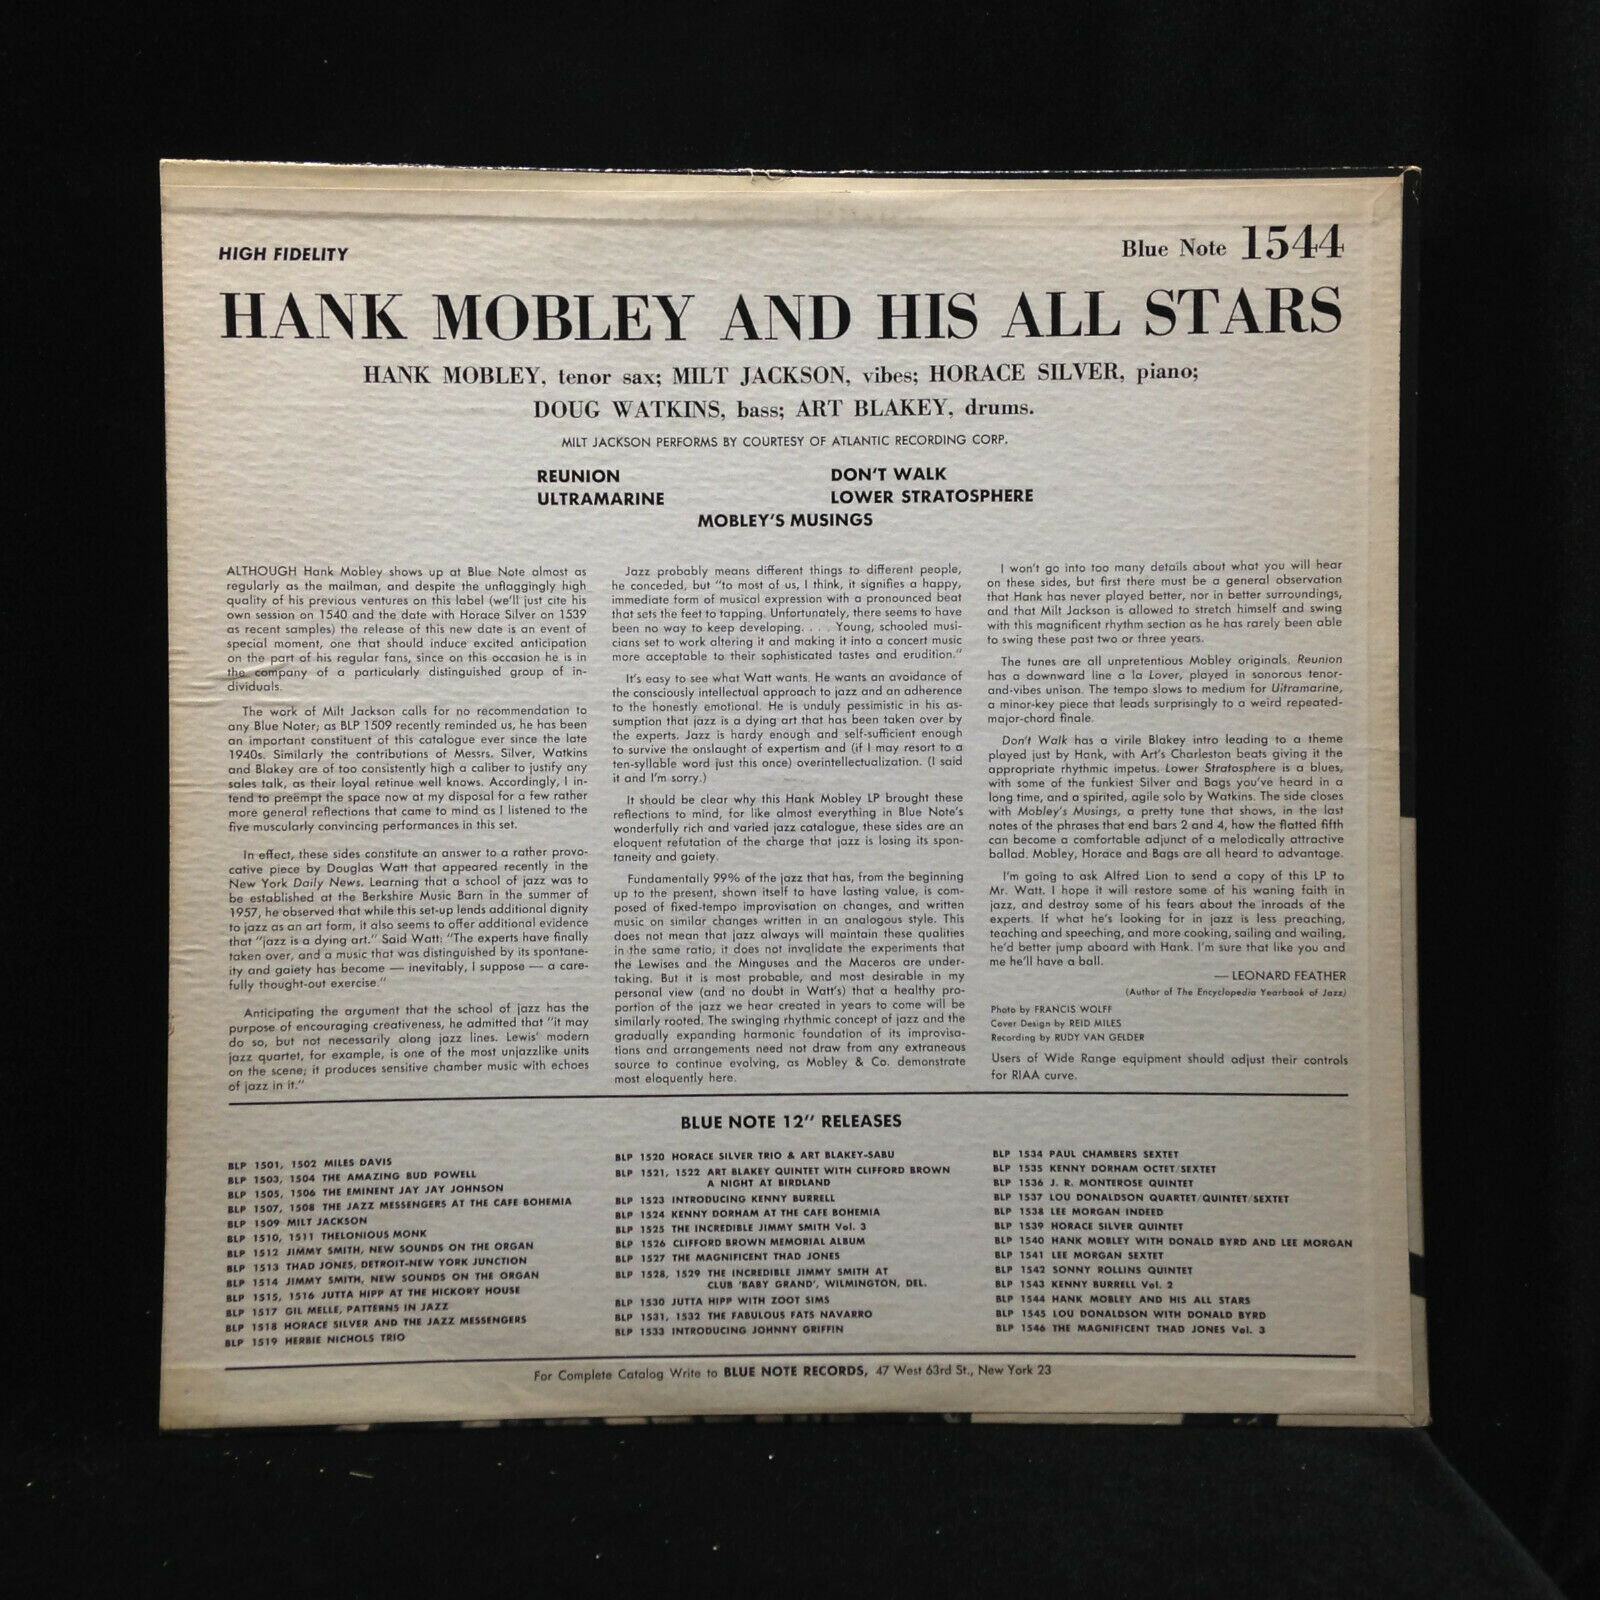 Pic 1 Hank Mobley-And His All Stars-Blue Note 1544-WEST 63RD NY 23-ORIG SUPERB COPY